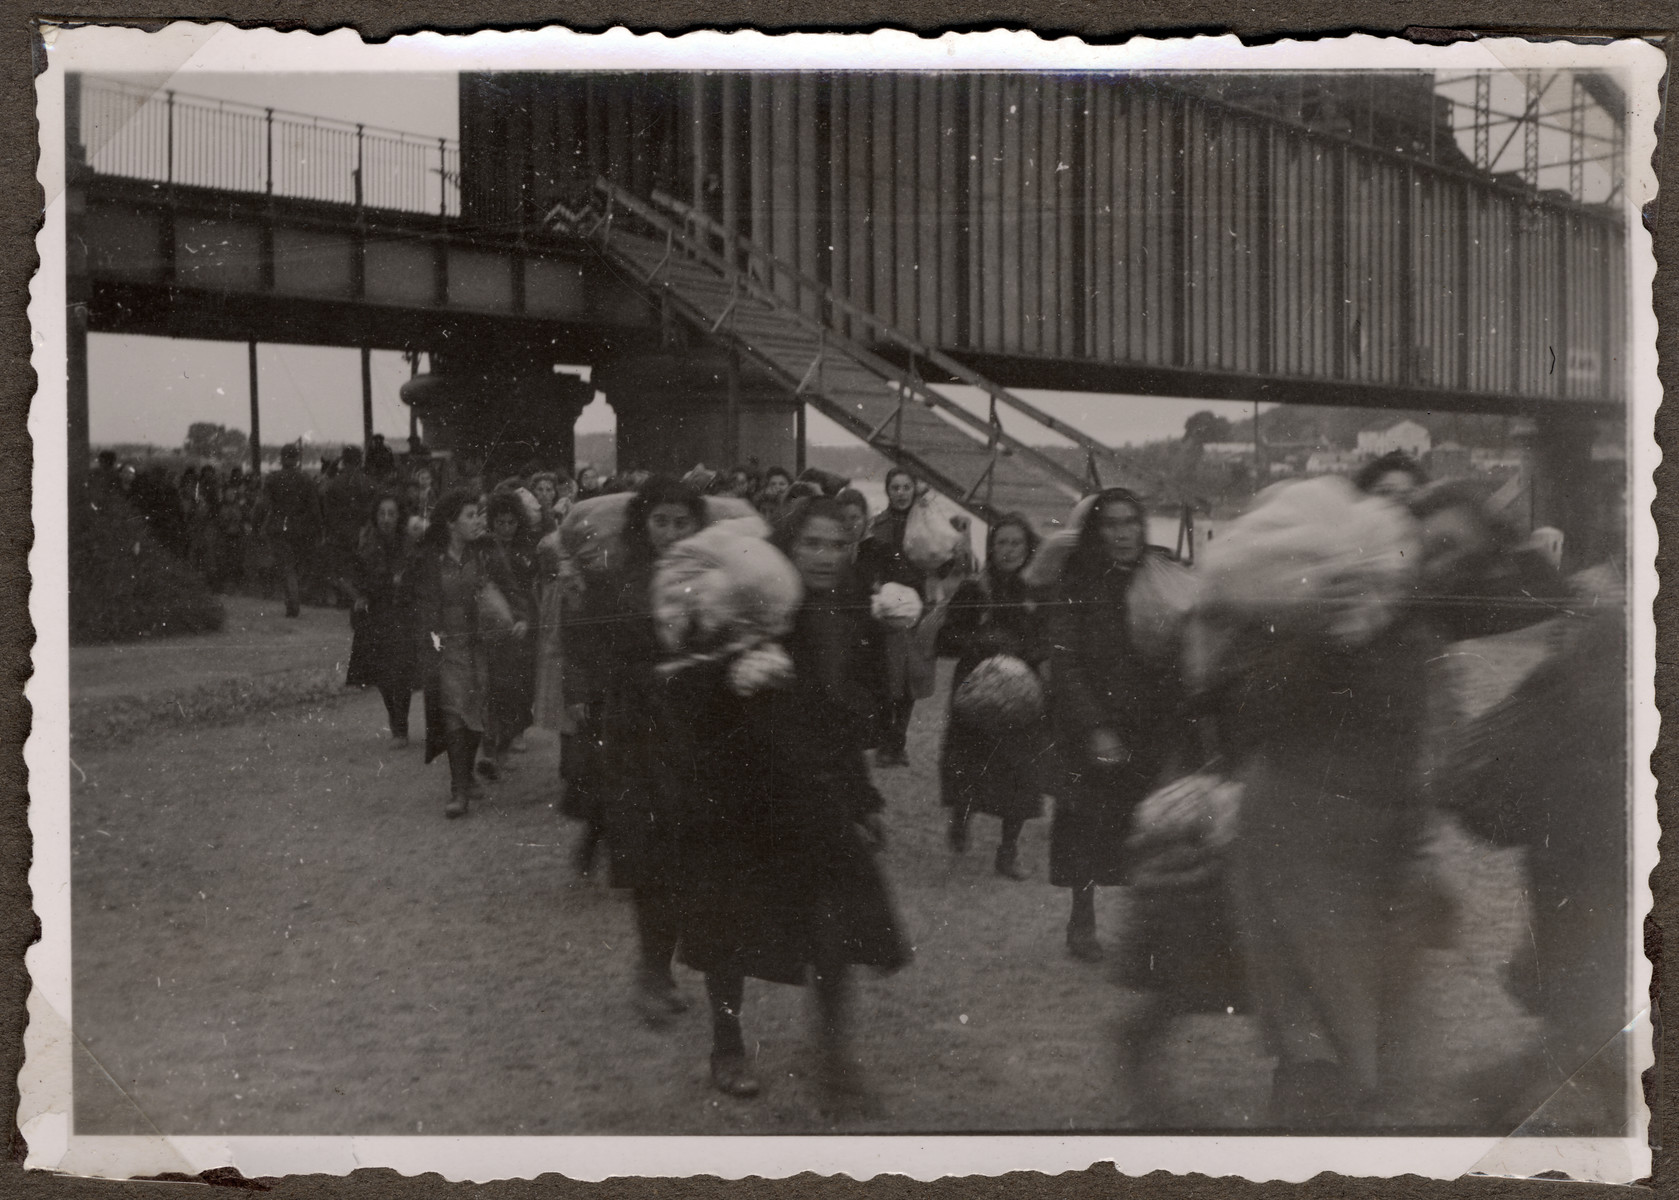 Jews move their belongings on carts and wagons from downtown Kaunas to the new ghetto located across the river in Slobodka.